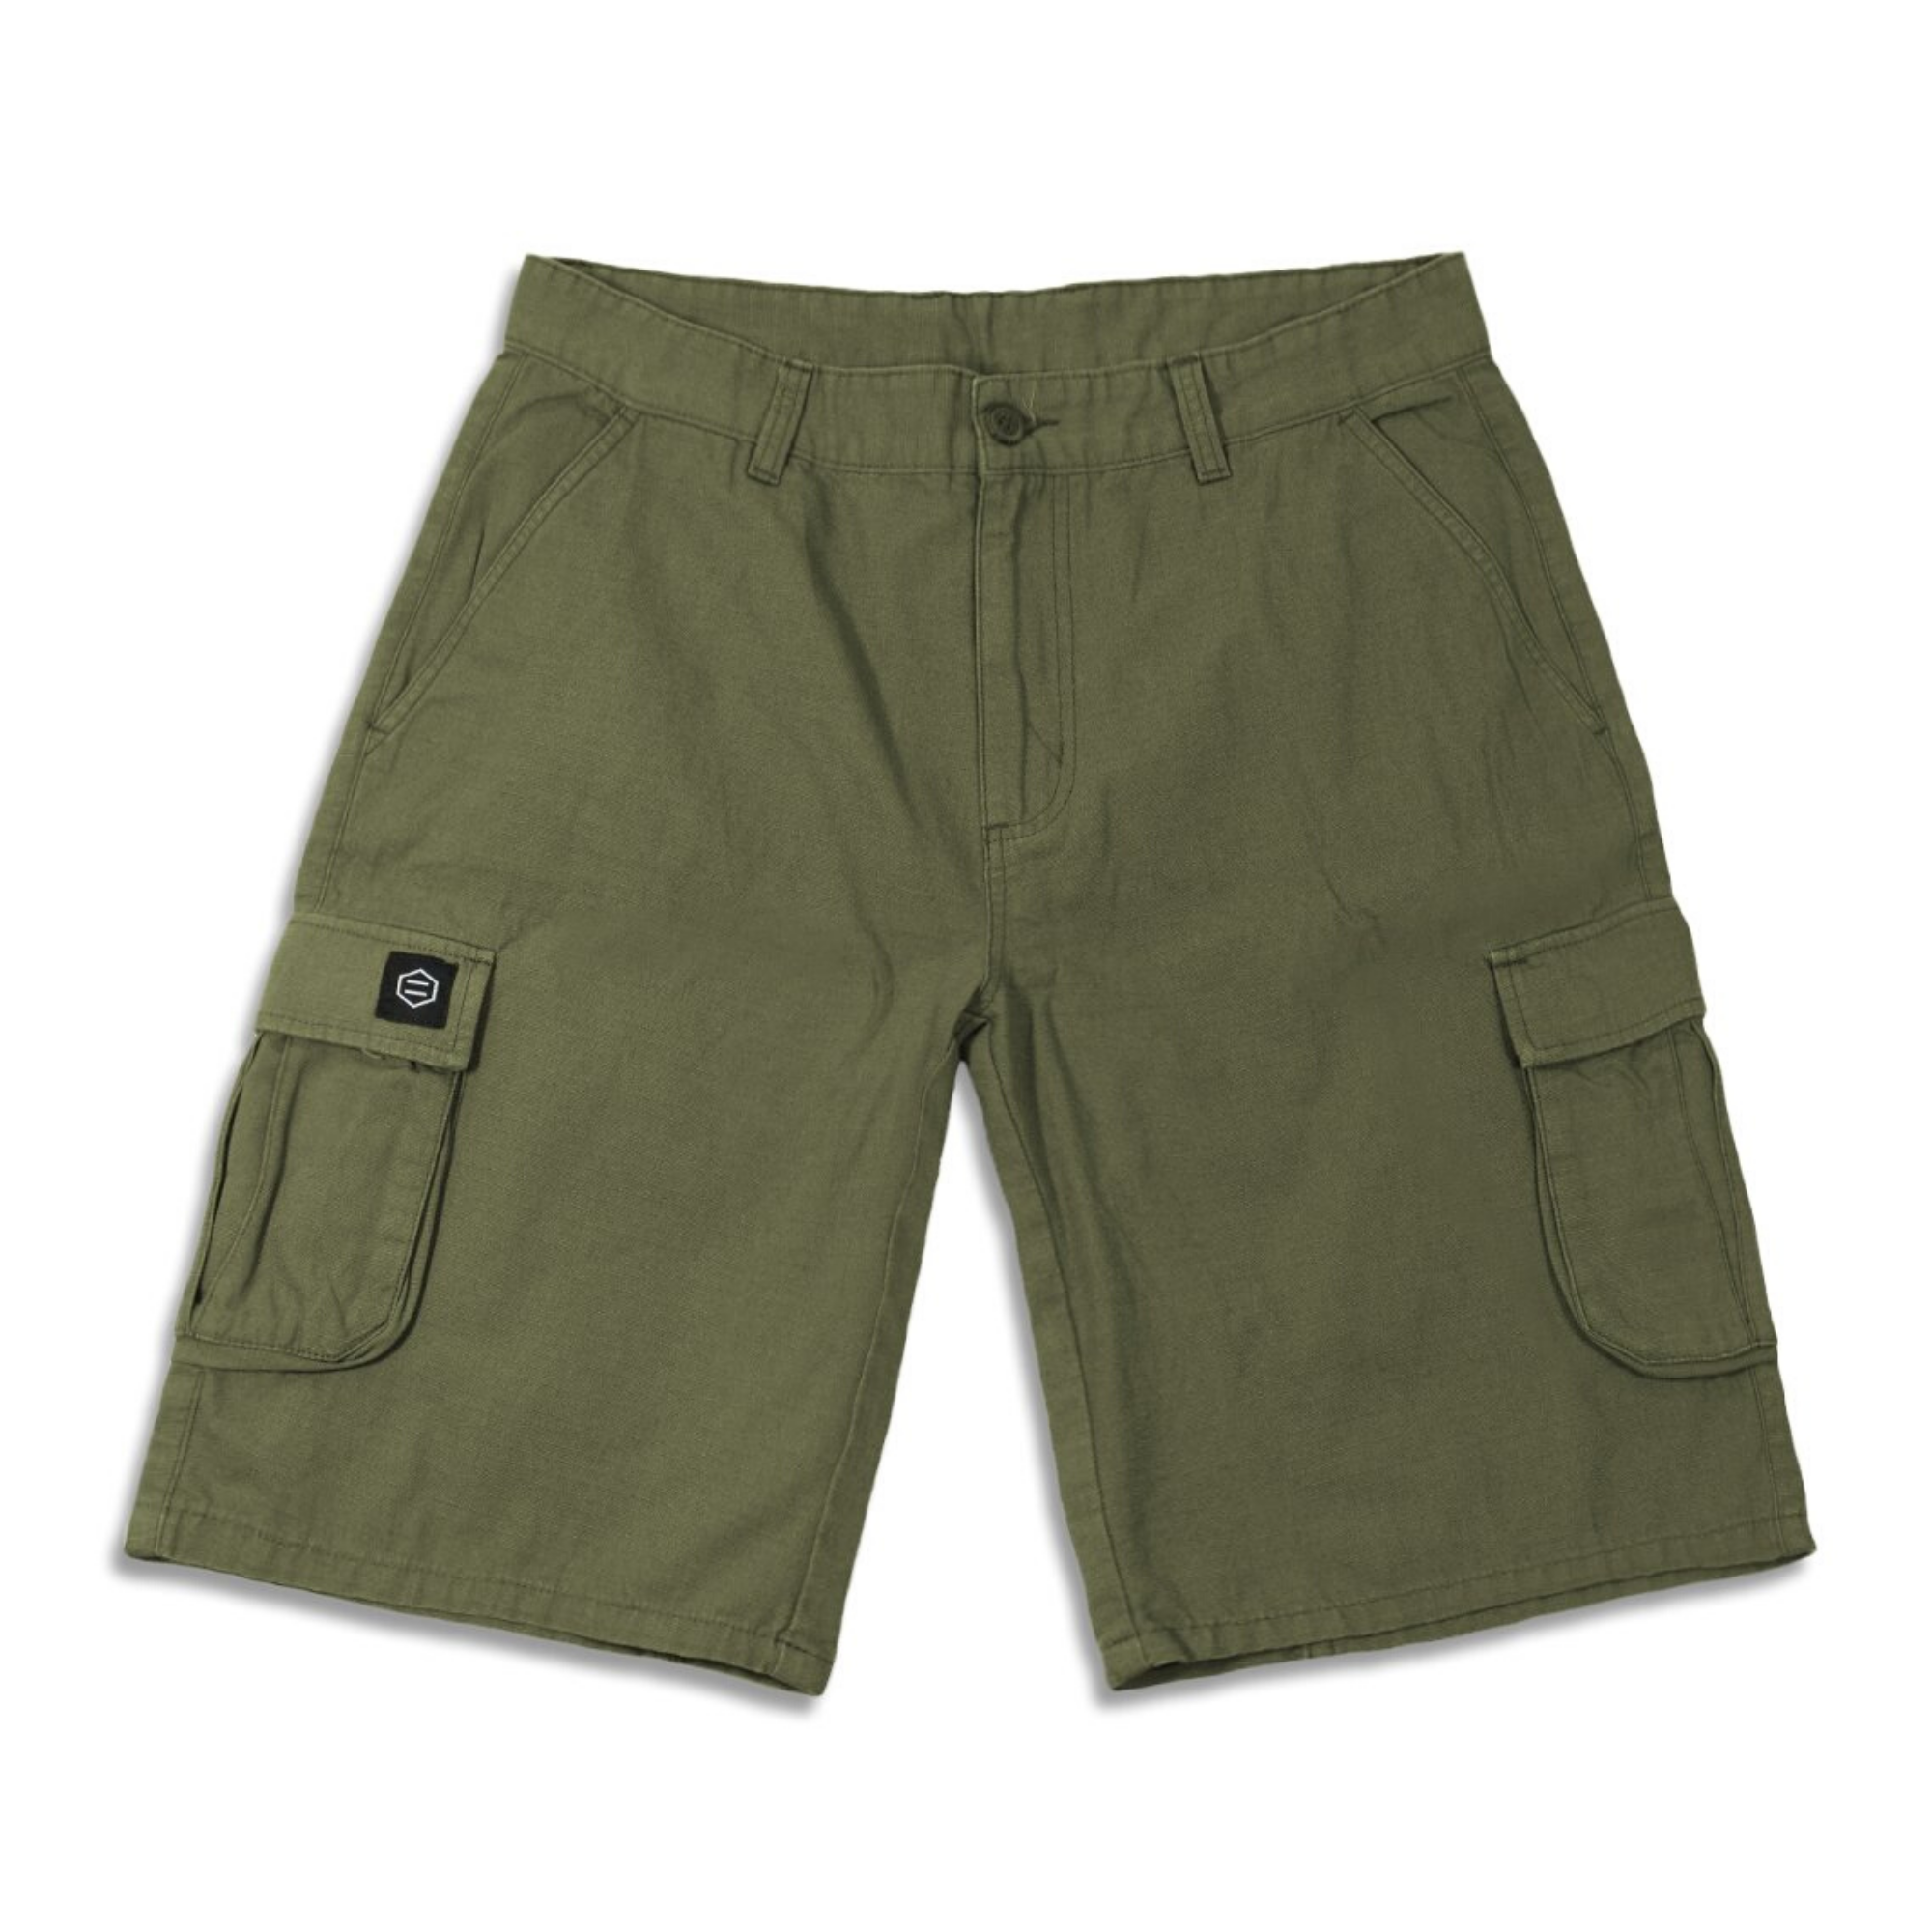 DOLLY NOIRE - Shorts Ripstop Green